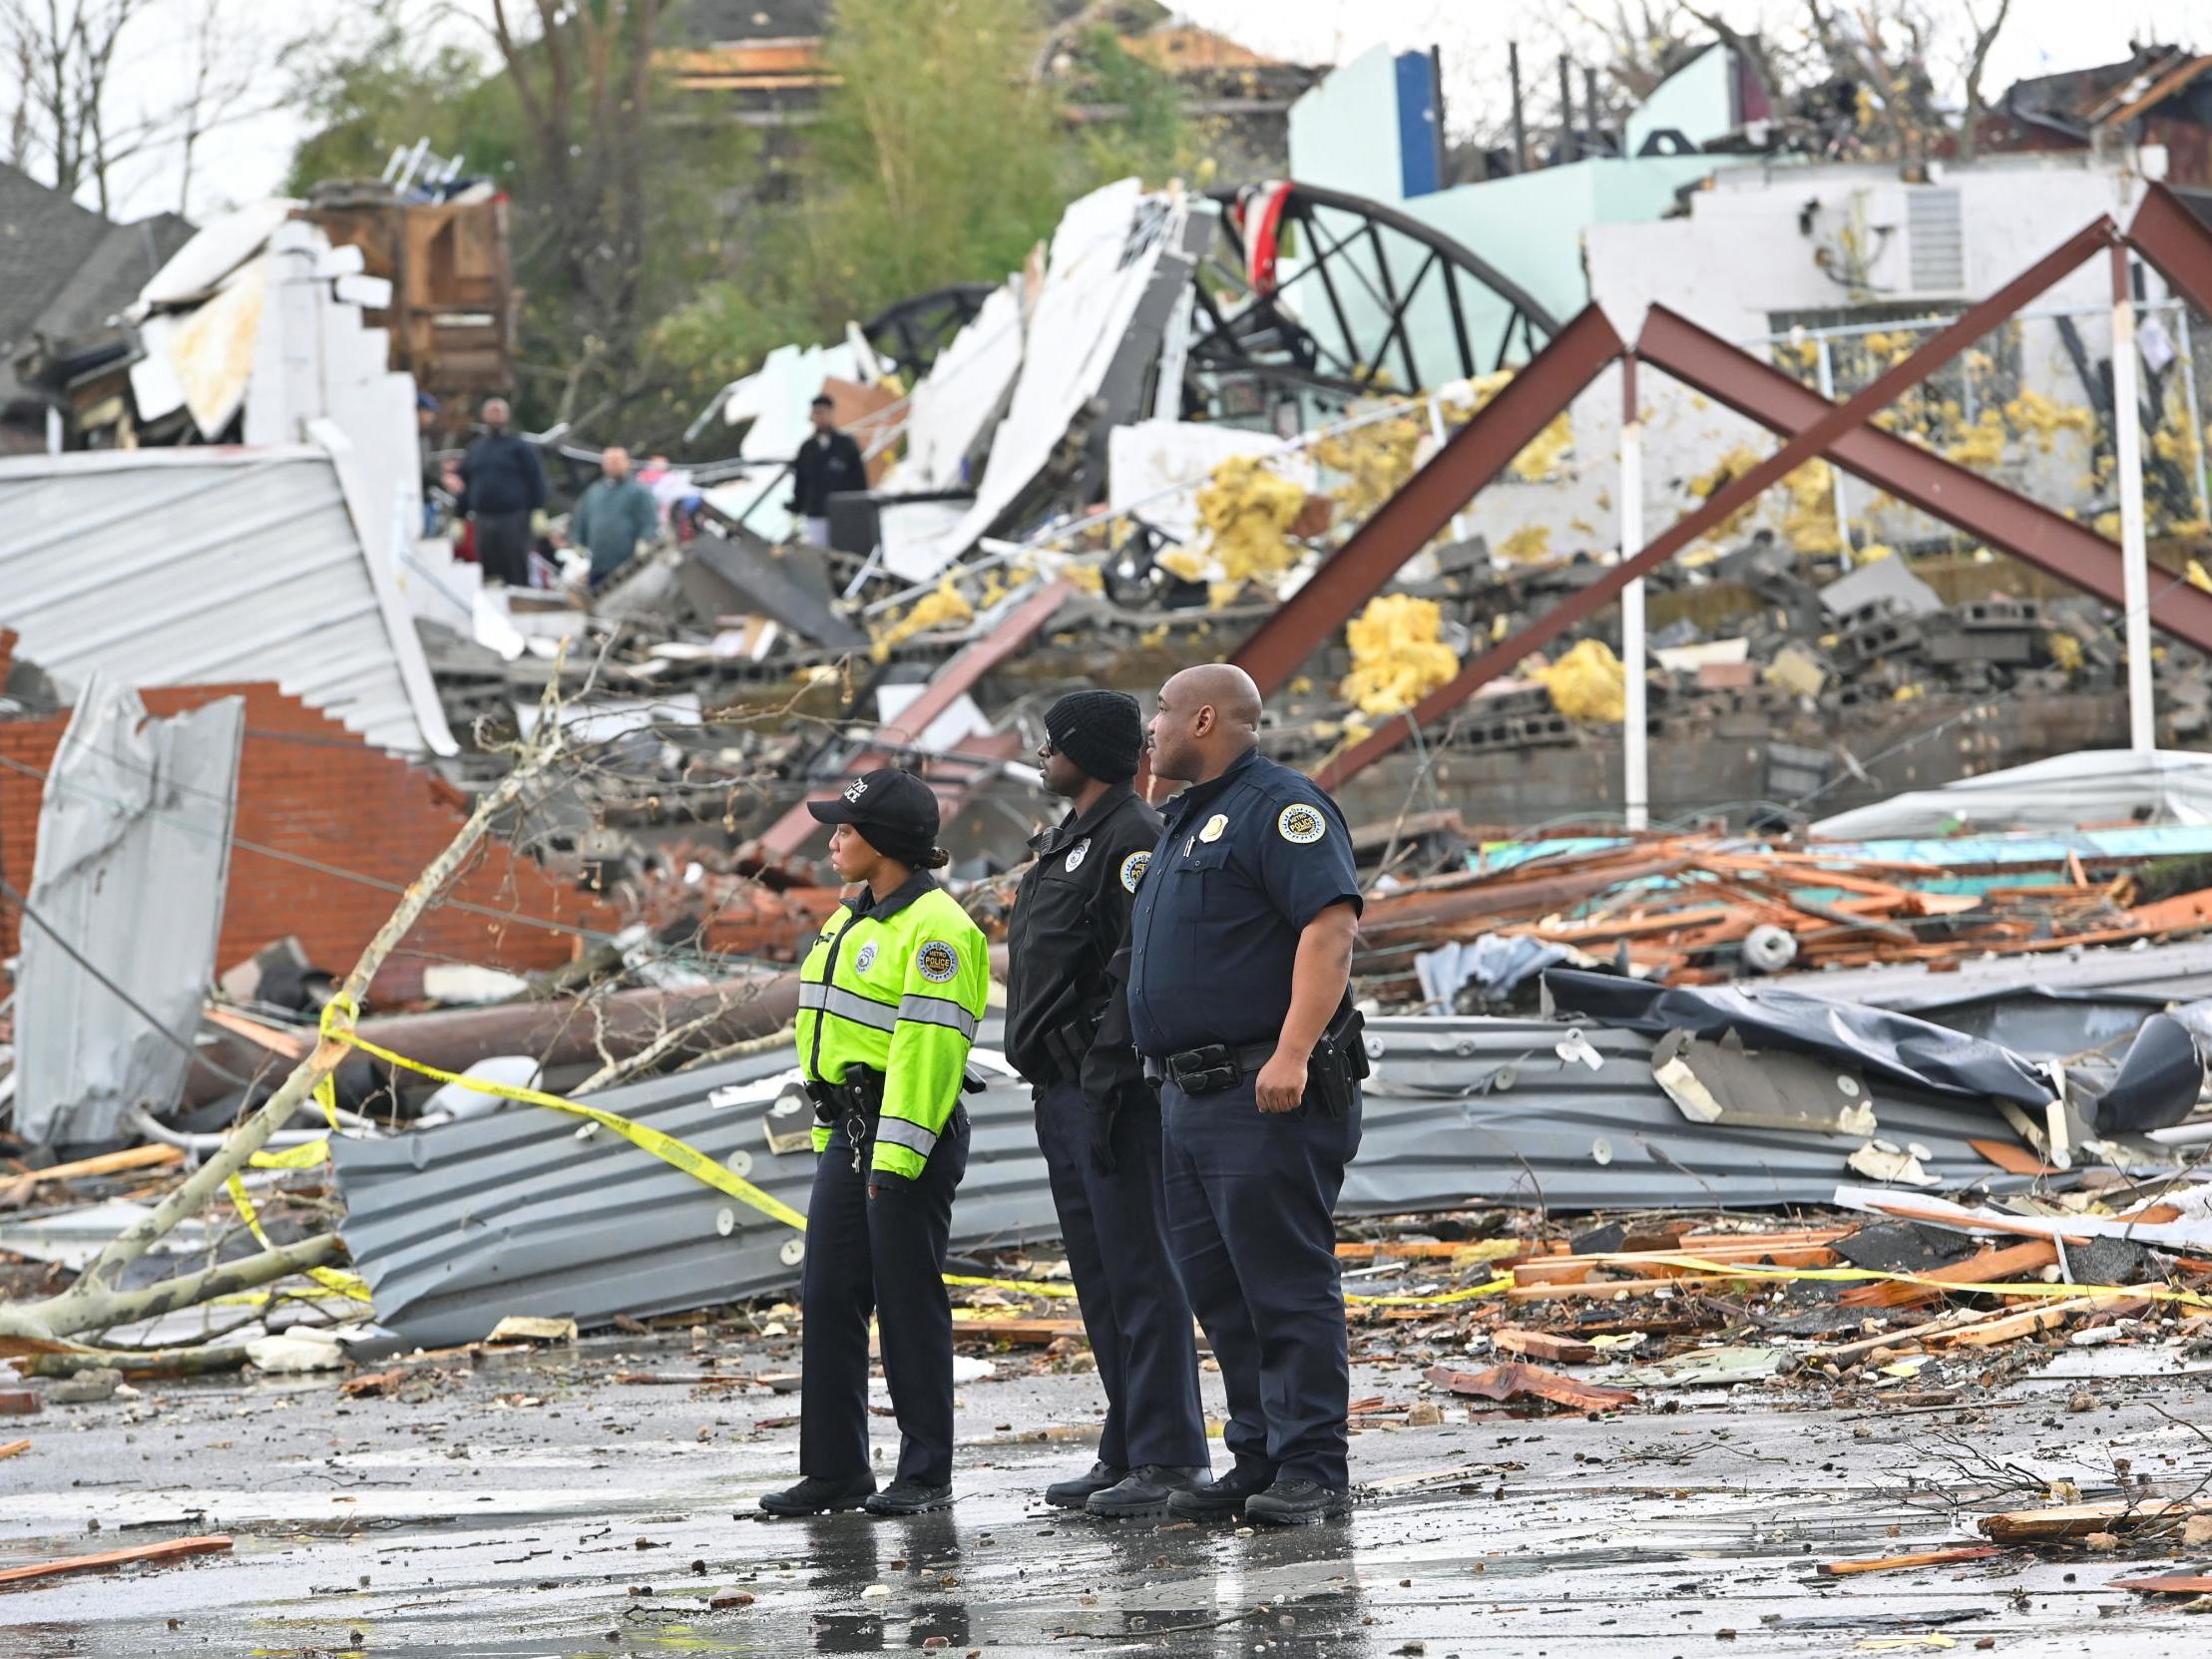 Tennessee tornadoes: Number of people still missing rises to 22